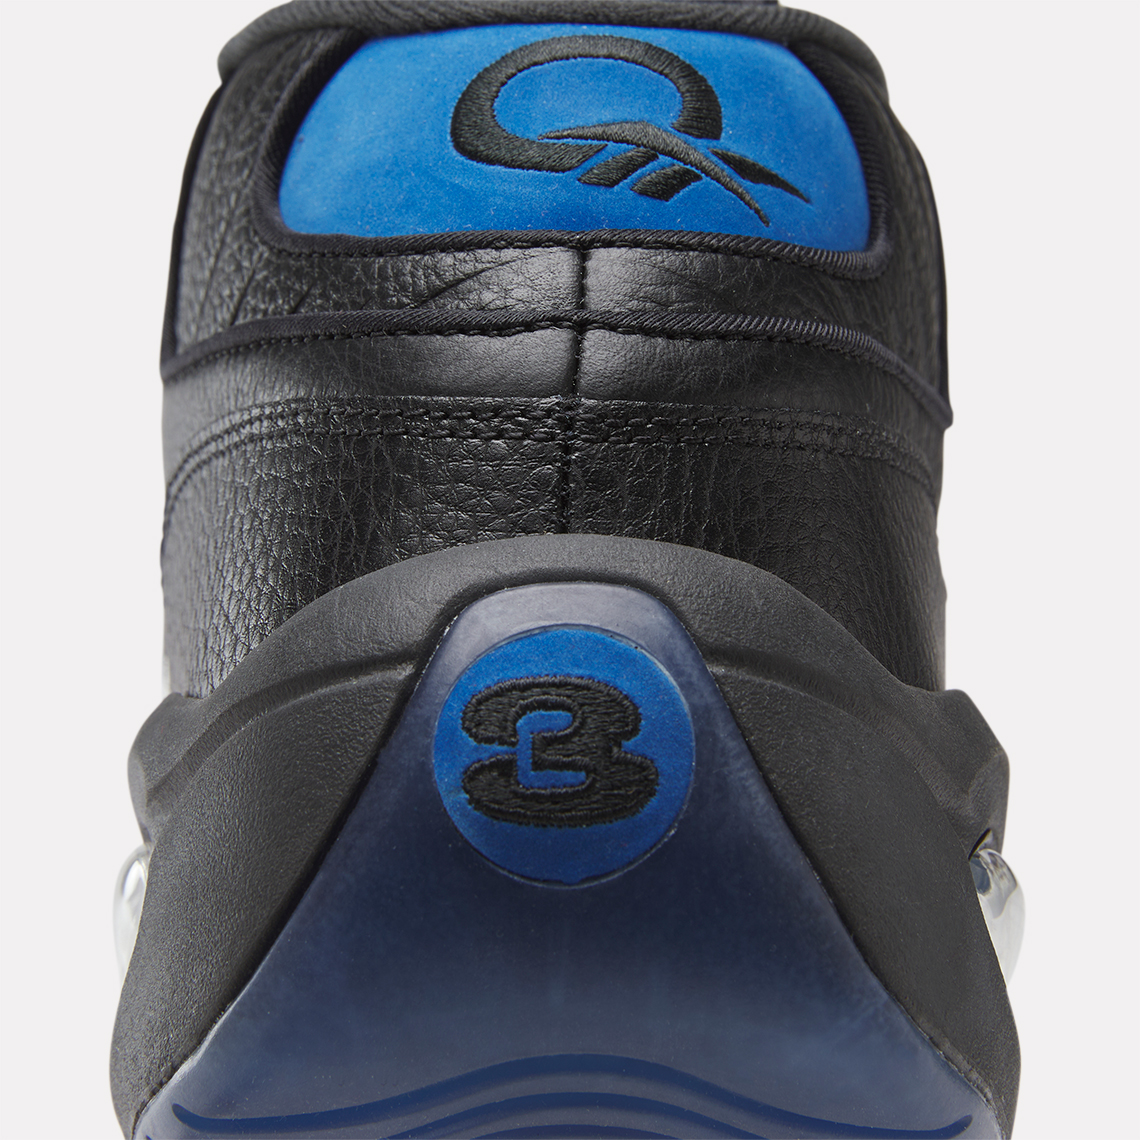 Reebok Question Mid Black And Blue Rb0057 9